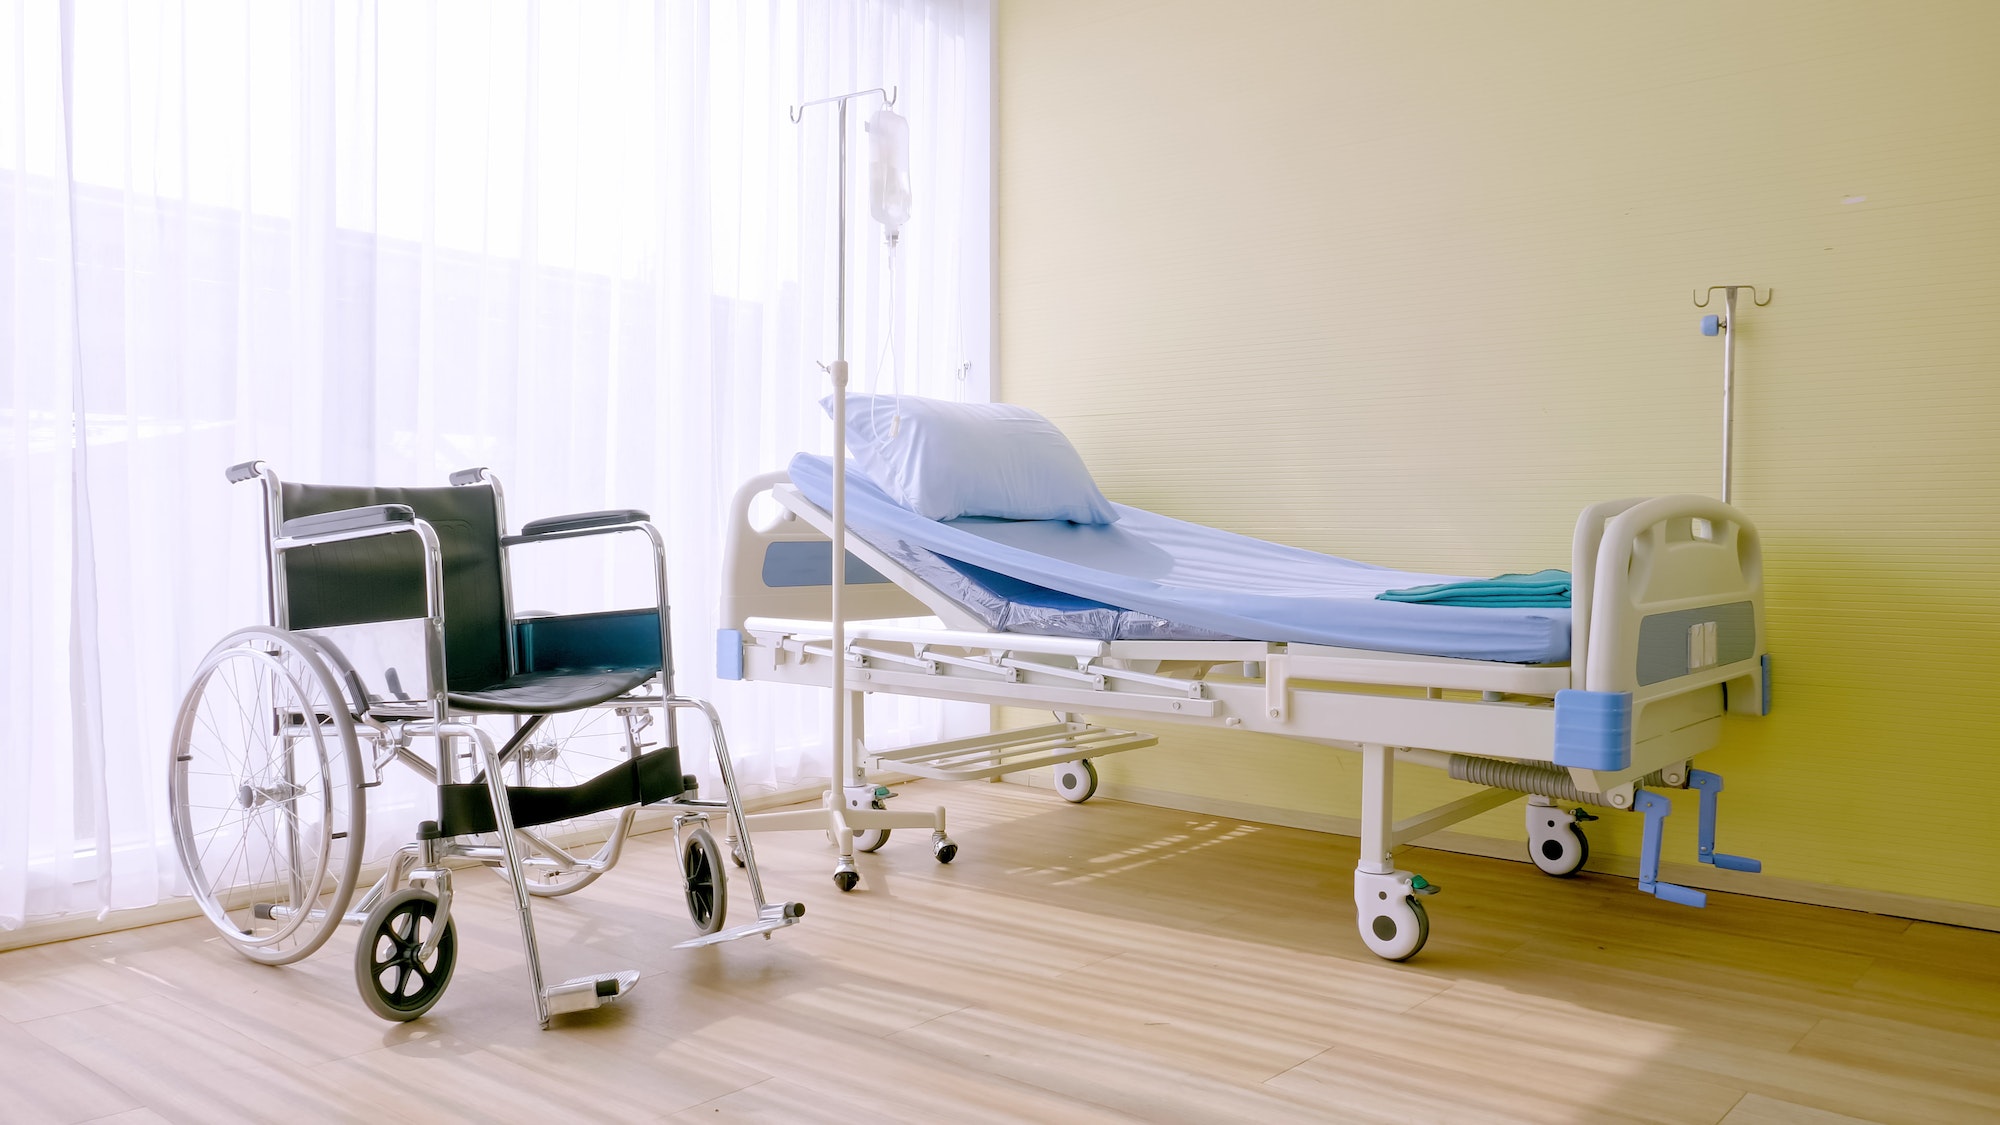 Hospital bed and wheelchair at hospital room.